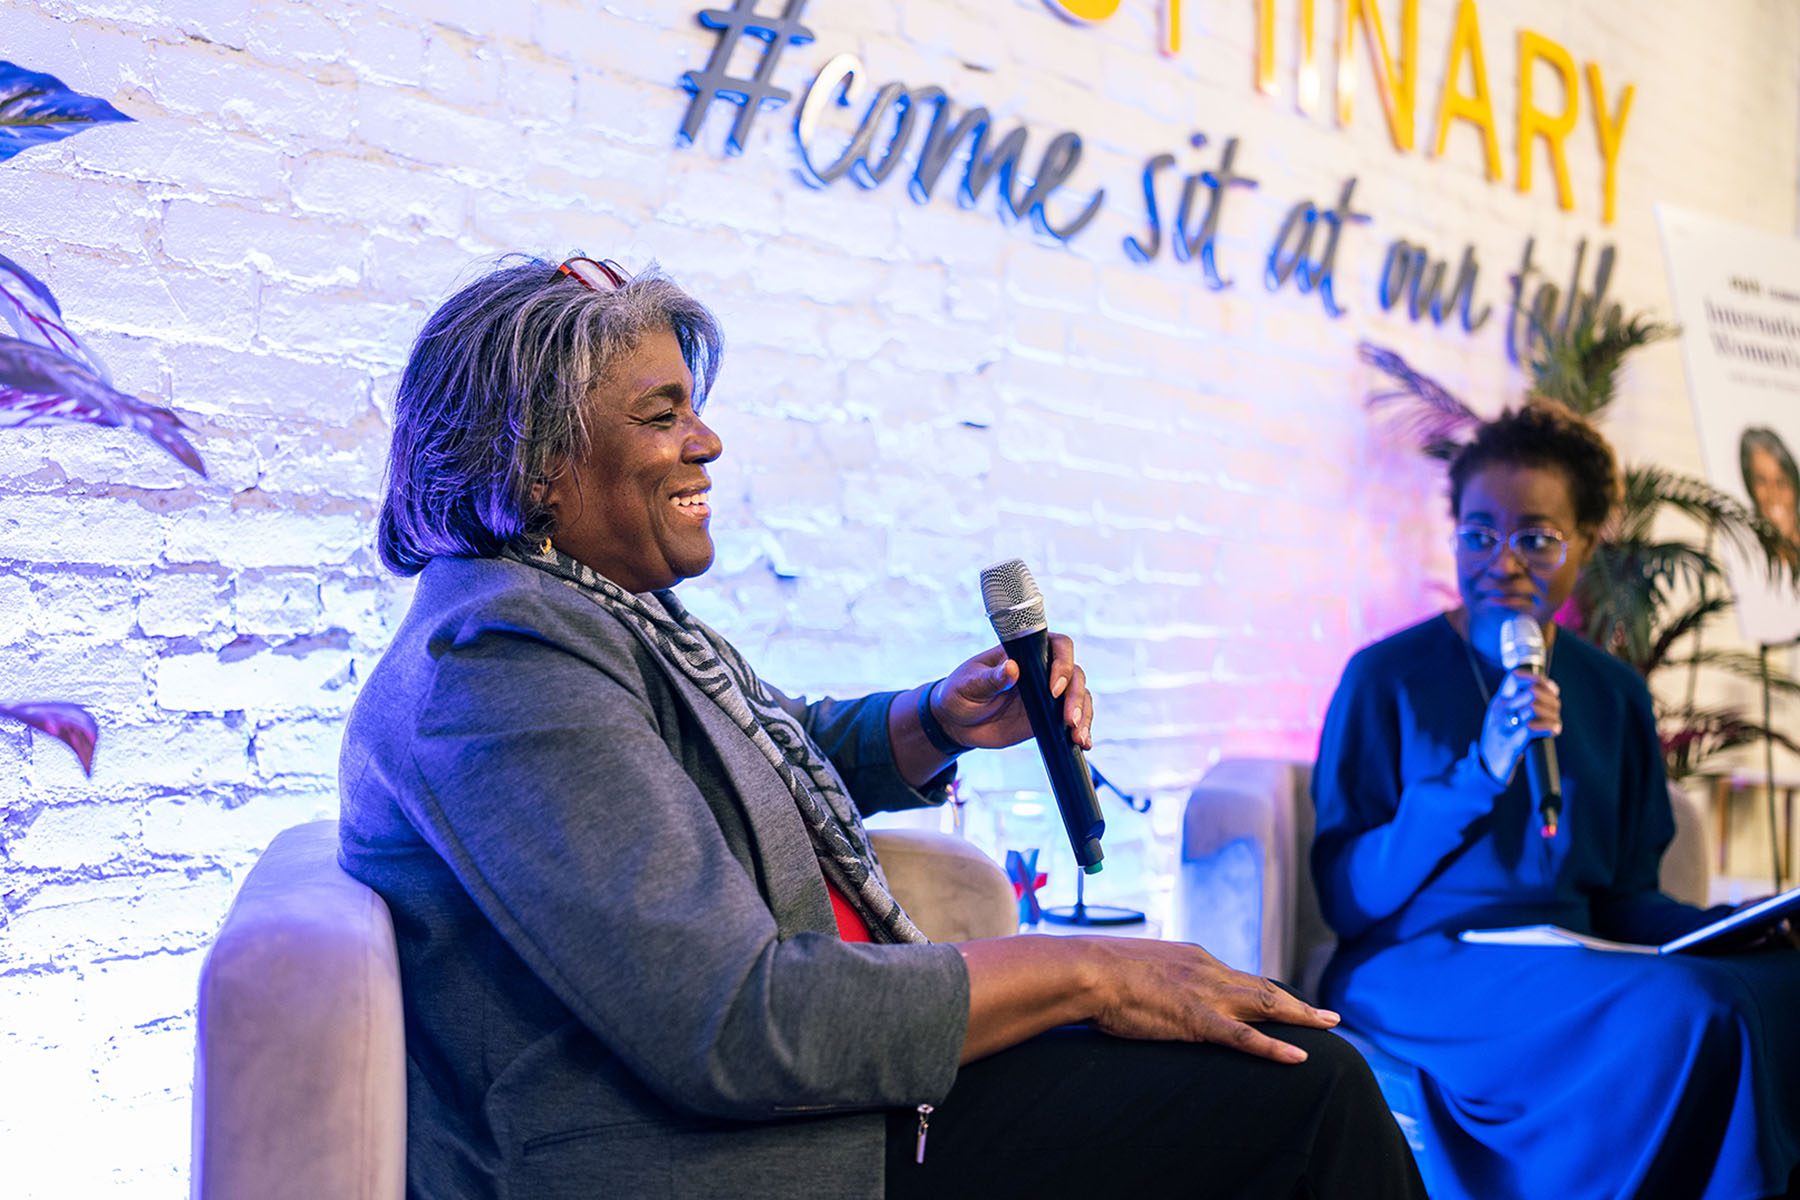 Linda Thomas-Greenfield speaks with The 19th's editor-at-large Errin Haines at "The 19th Celebrates: International Women's Day" event at The Luminary in New York City on March 7, 2023.